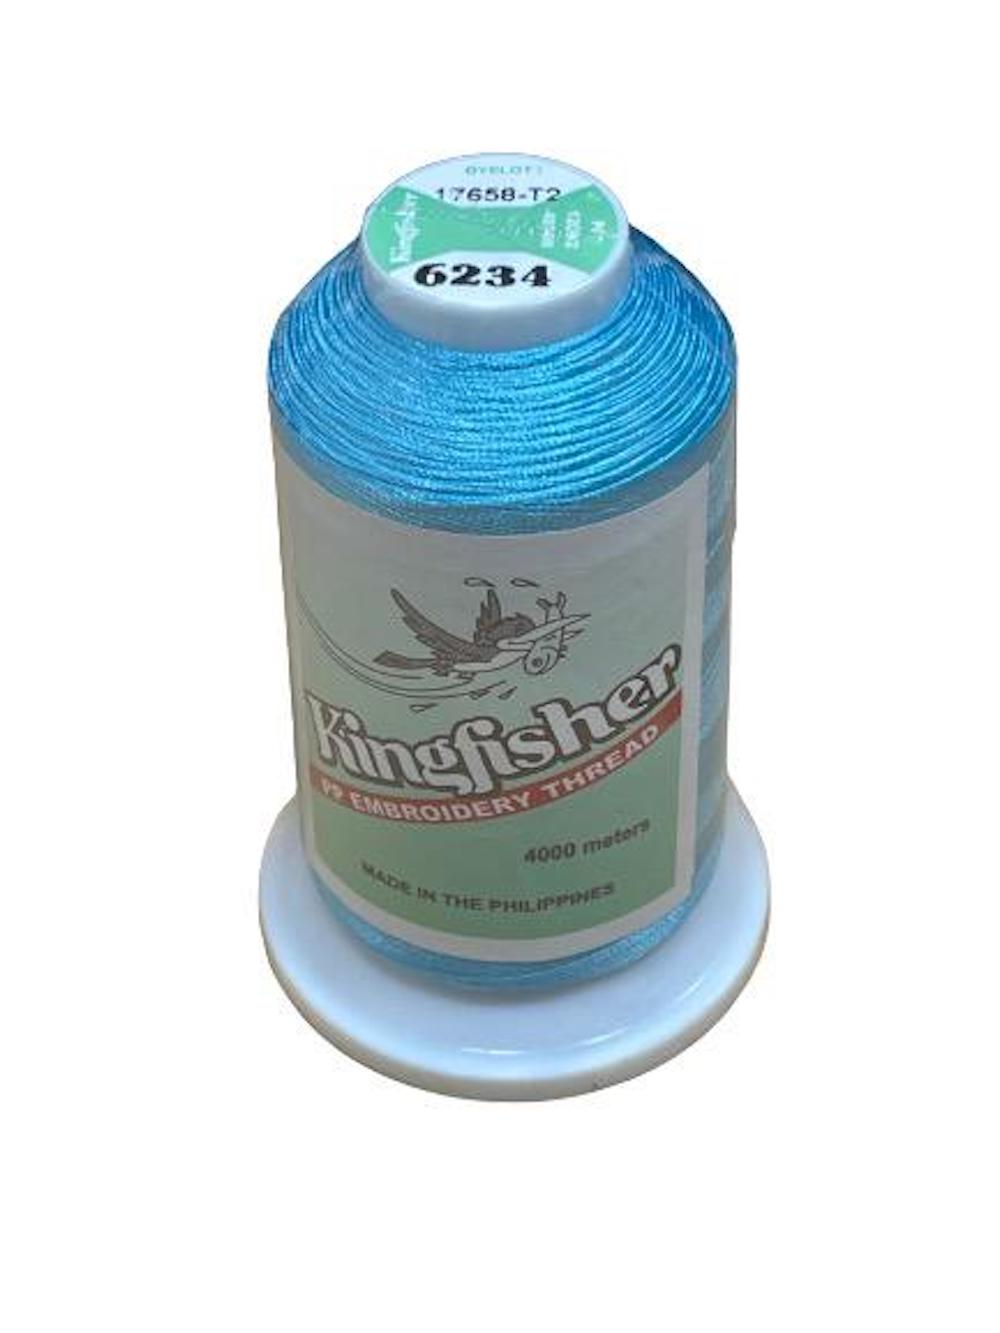 King Fisher Embroidery Thread 4000m 6234 Blue - MY SEWING MALL